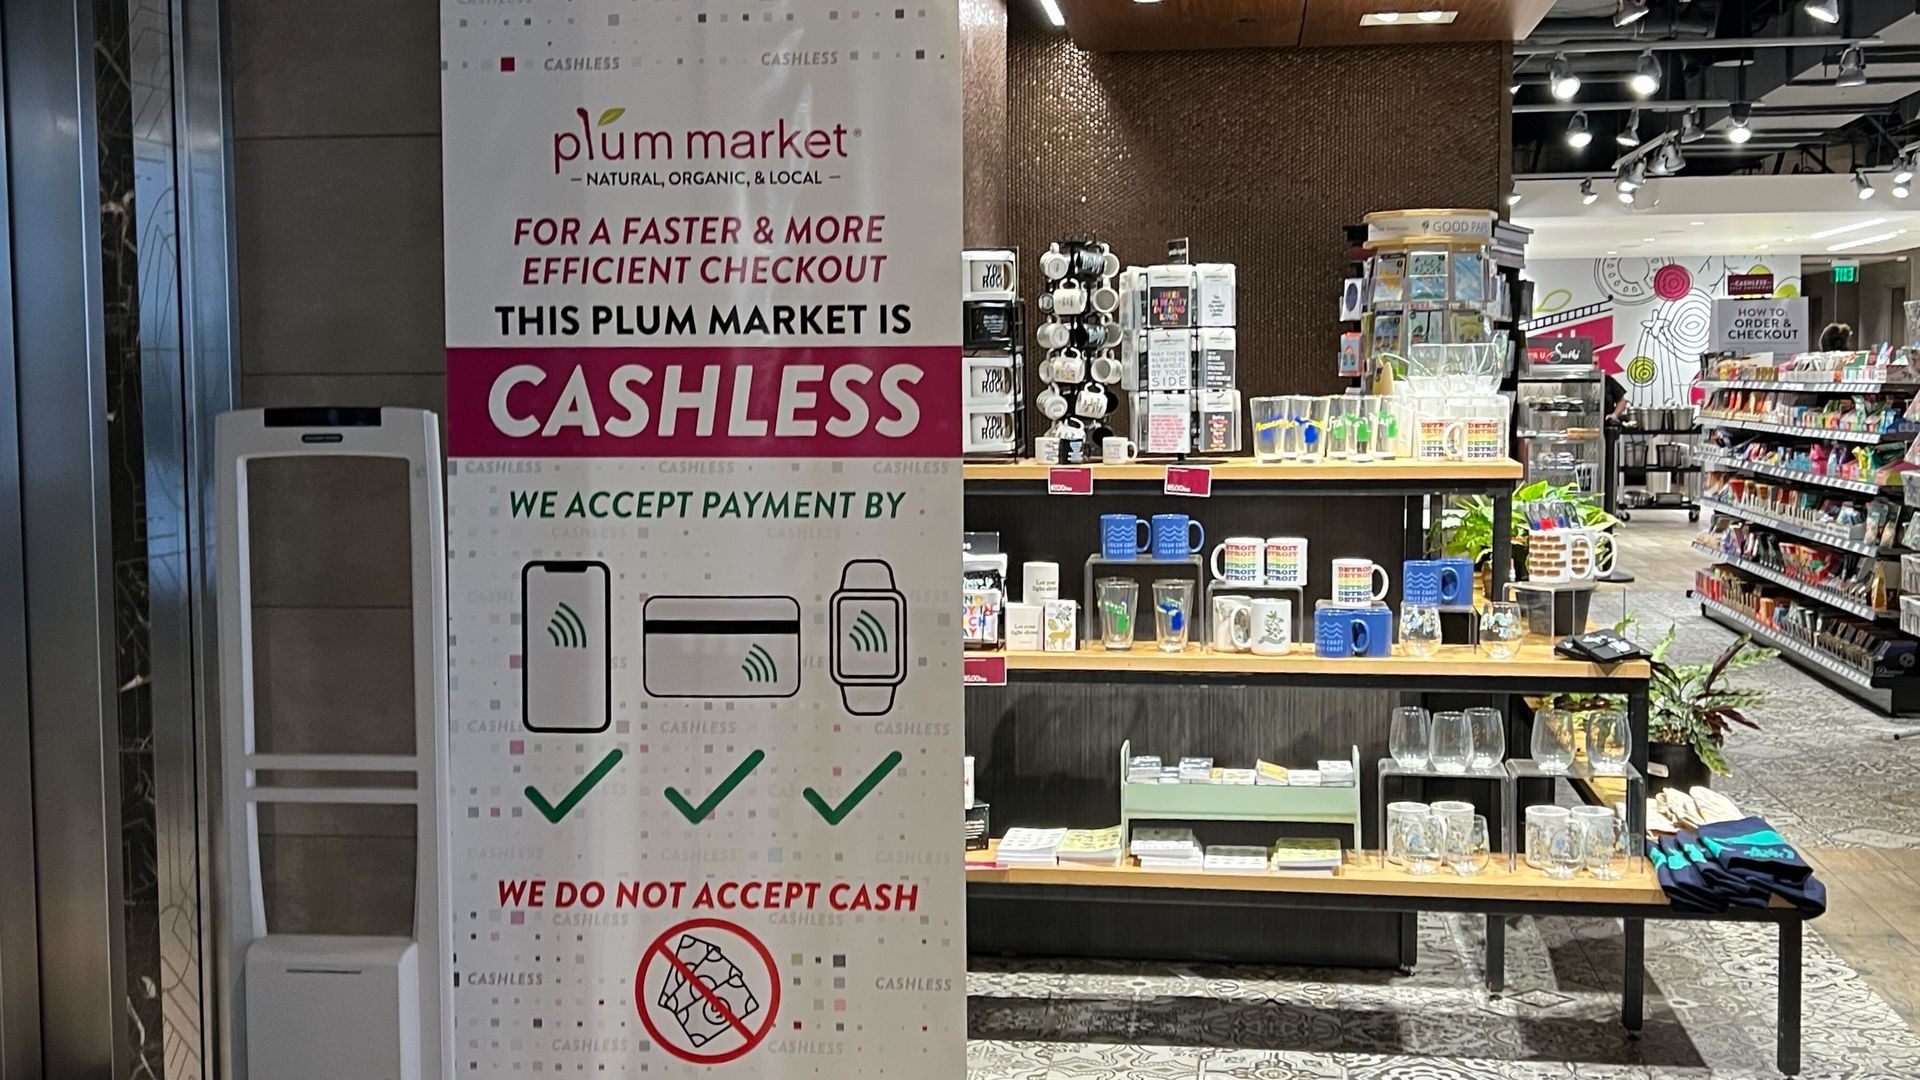 A sign in Plum Market says it is cashless "for a faster and more efficient checkout." 